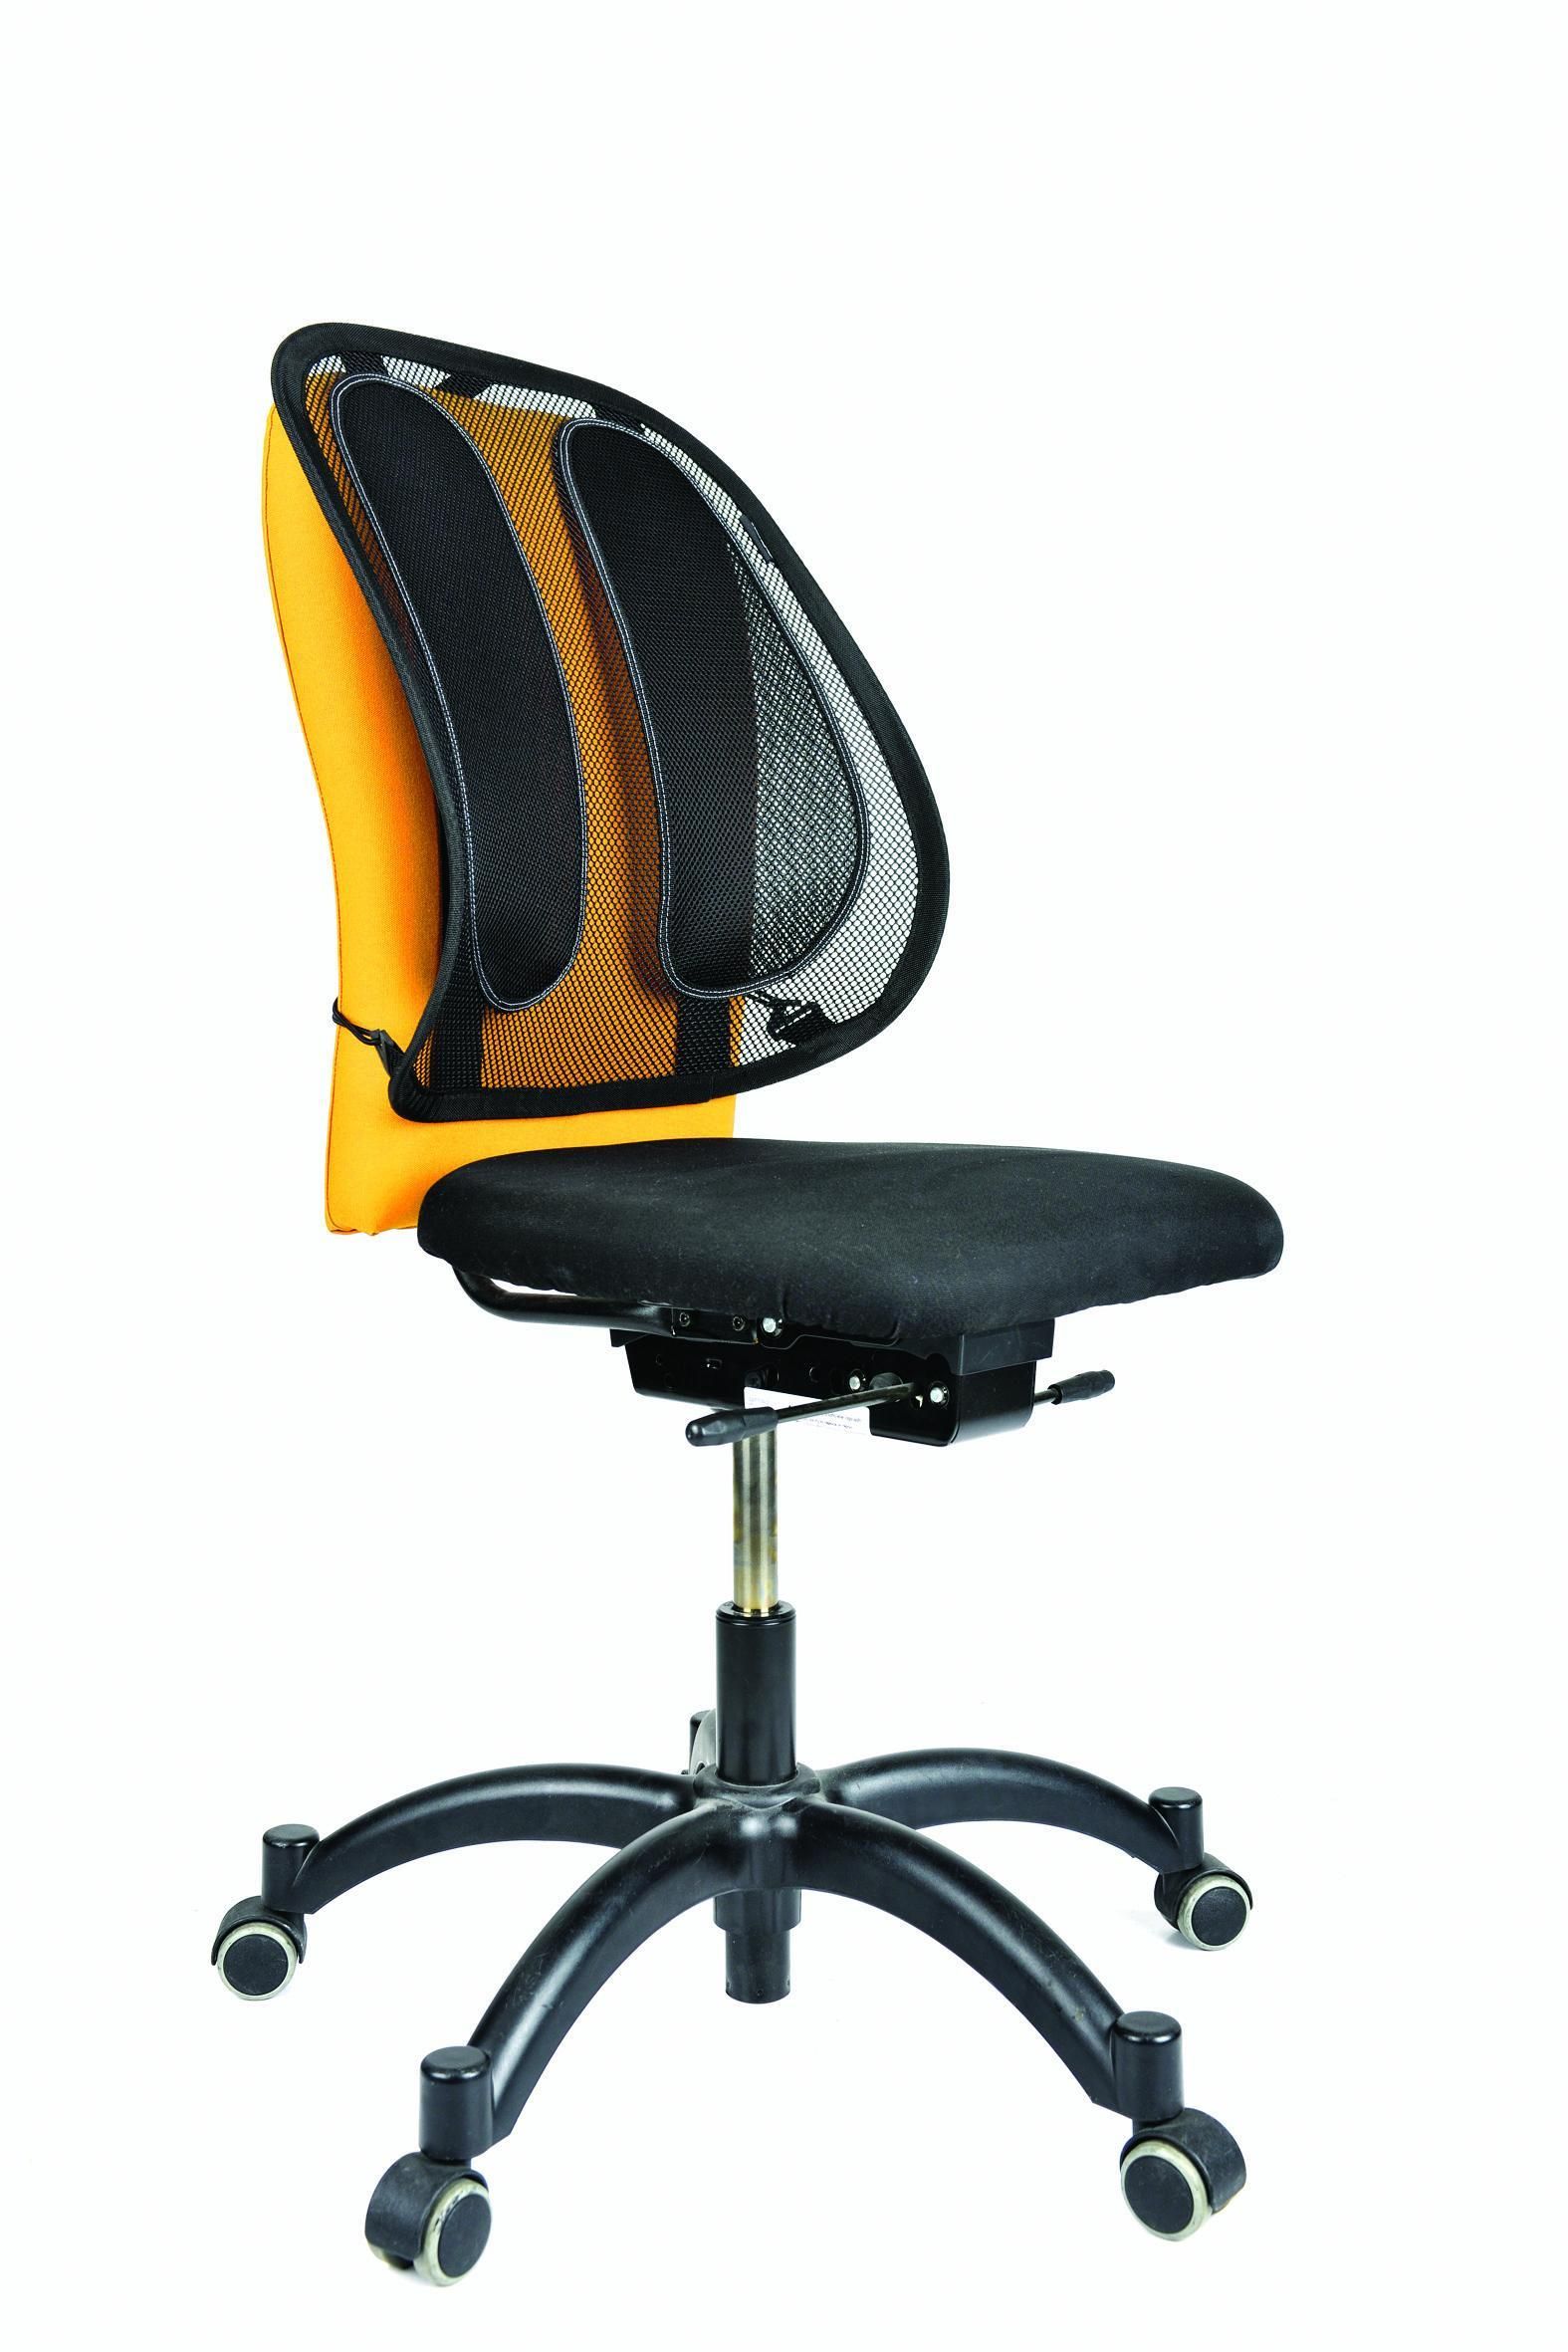 Fellowes Office Suites Supporto